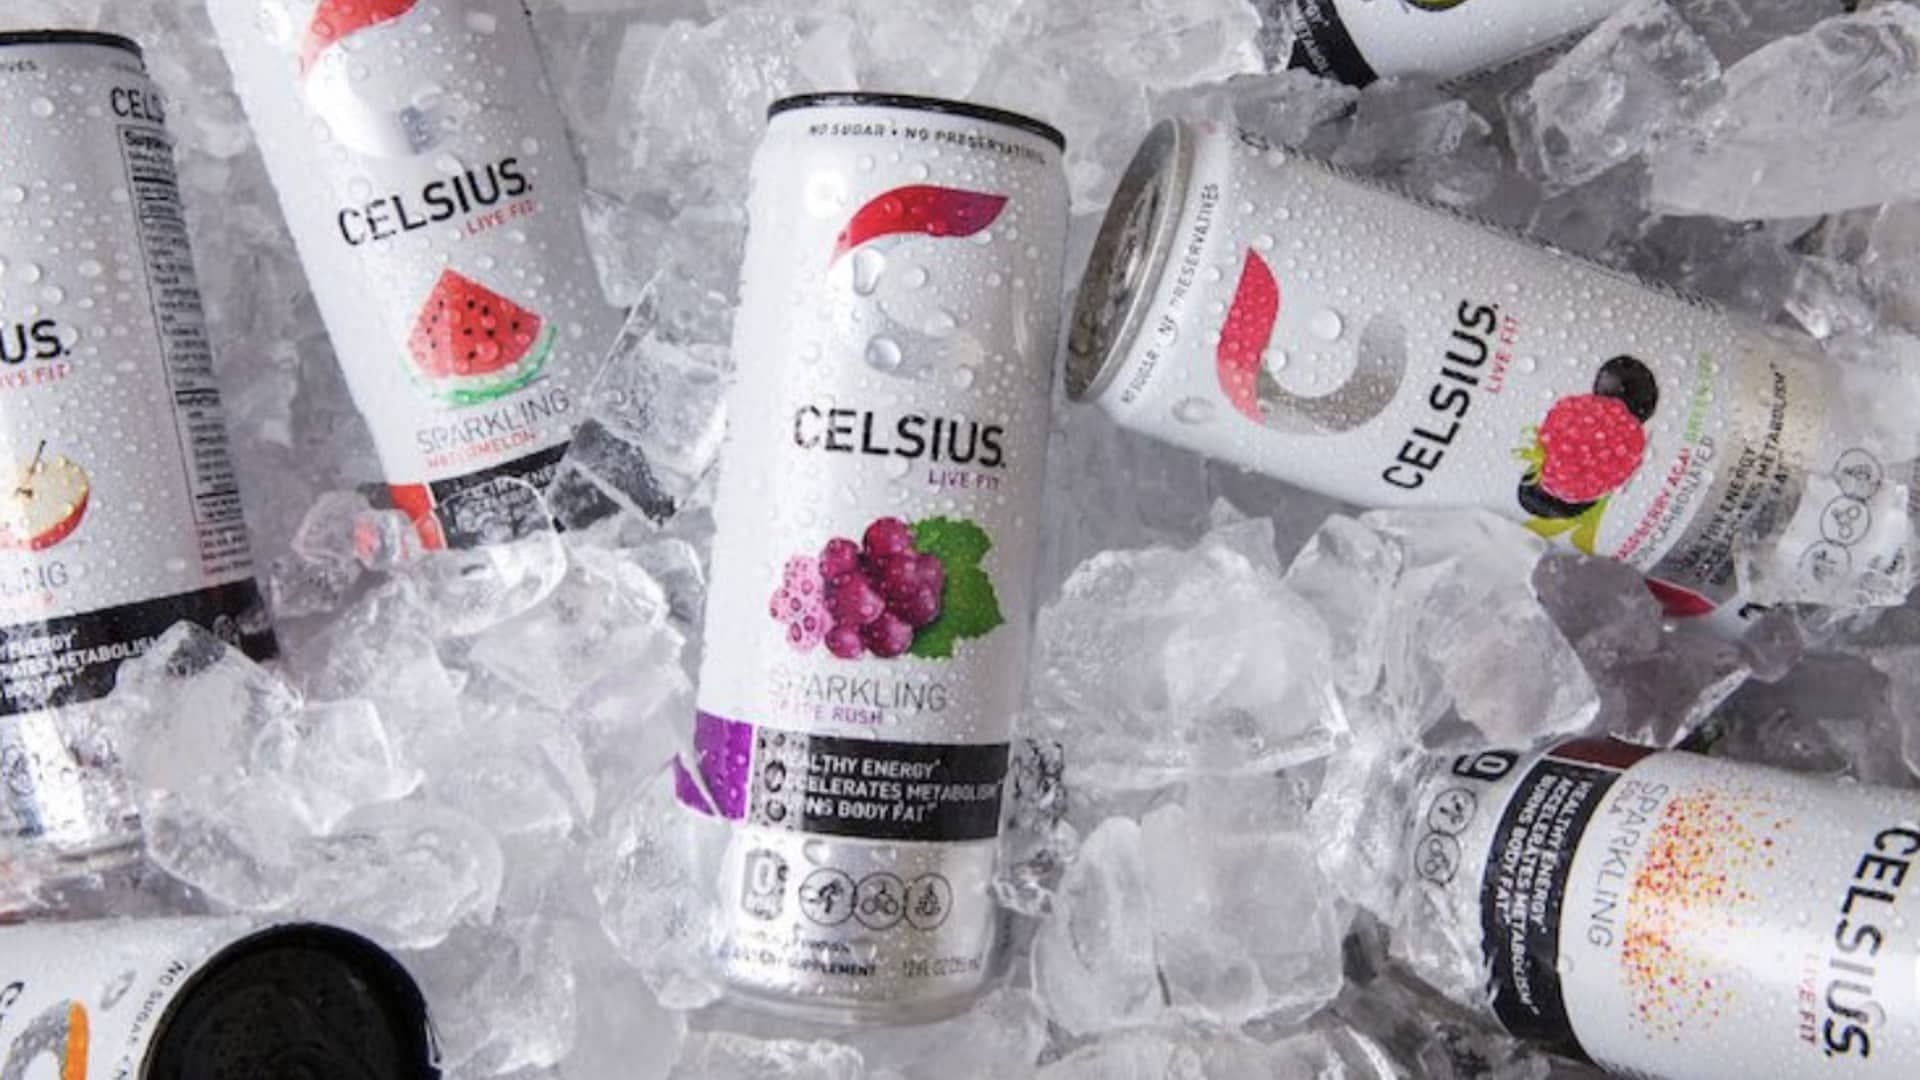 Celsius energy drinks typically contain around 200 milligrams of caffeine per serving.(Image via Celsius Holdings)